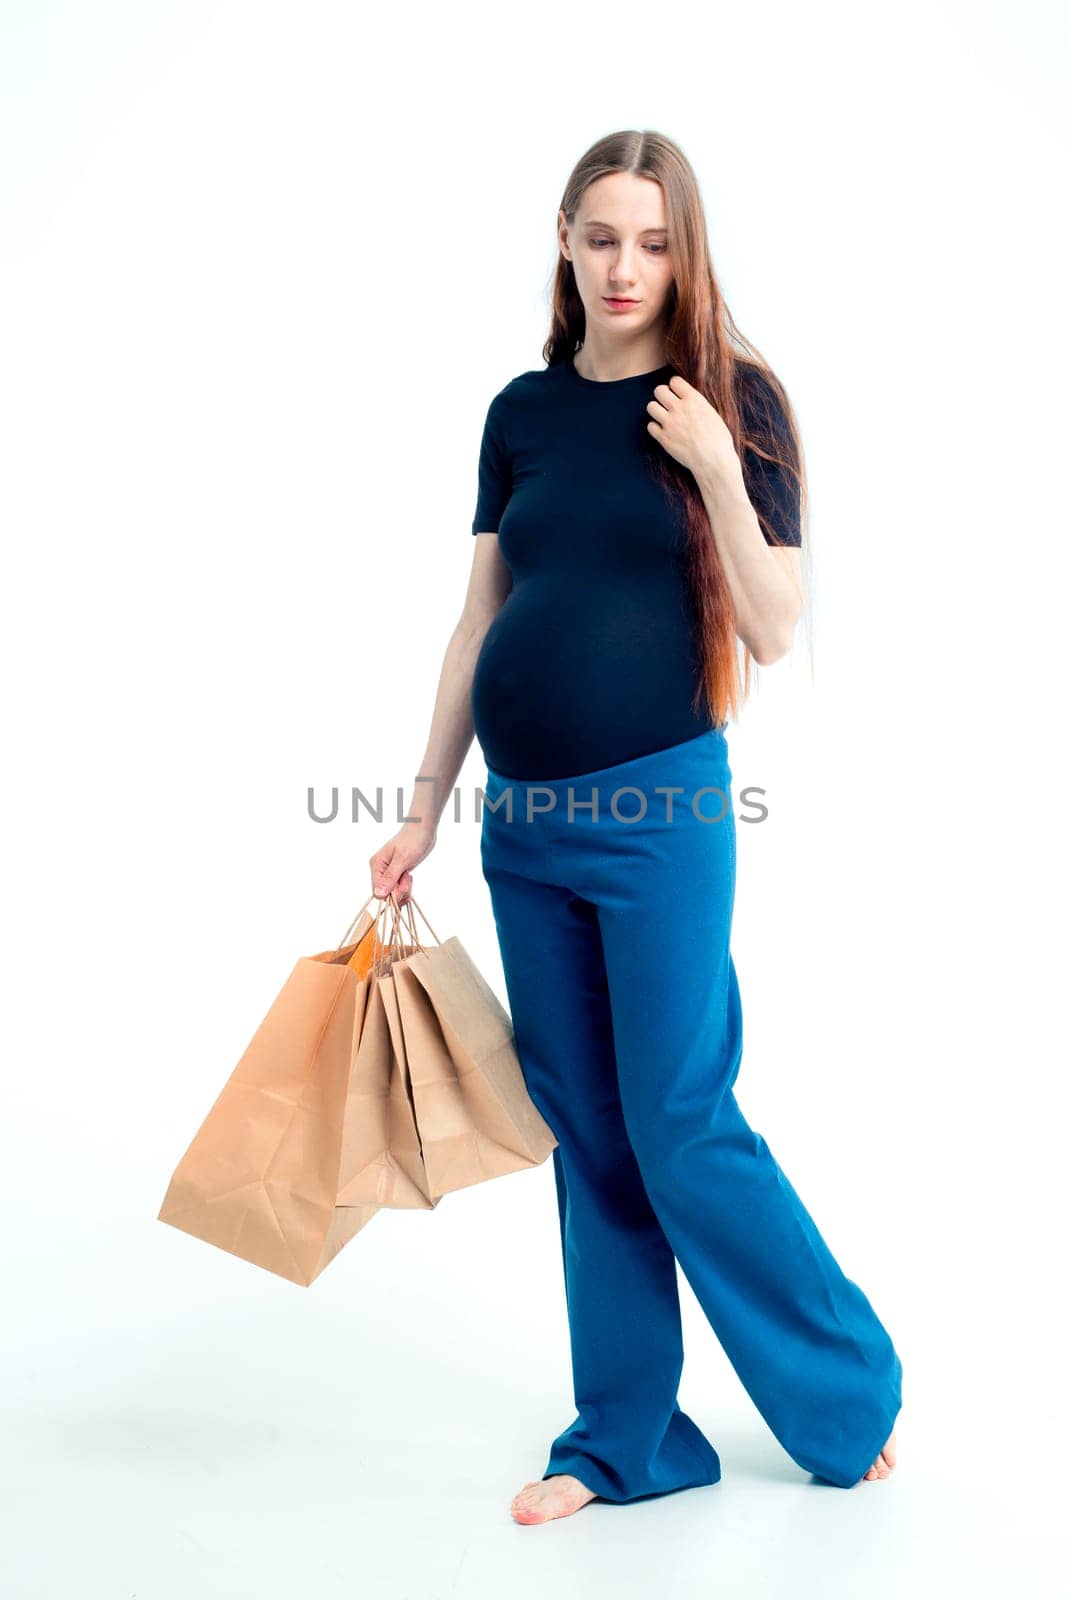 smiling beautiful young pregnant woman holding paper bags by kajasja